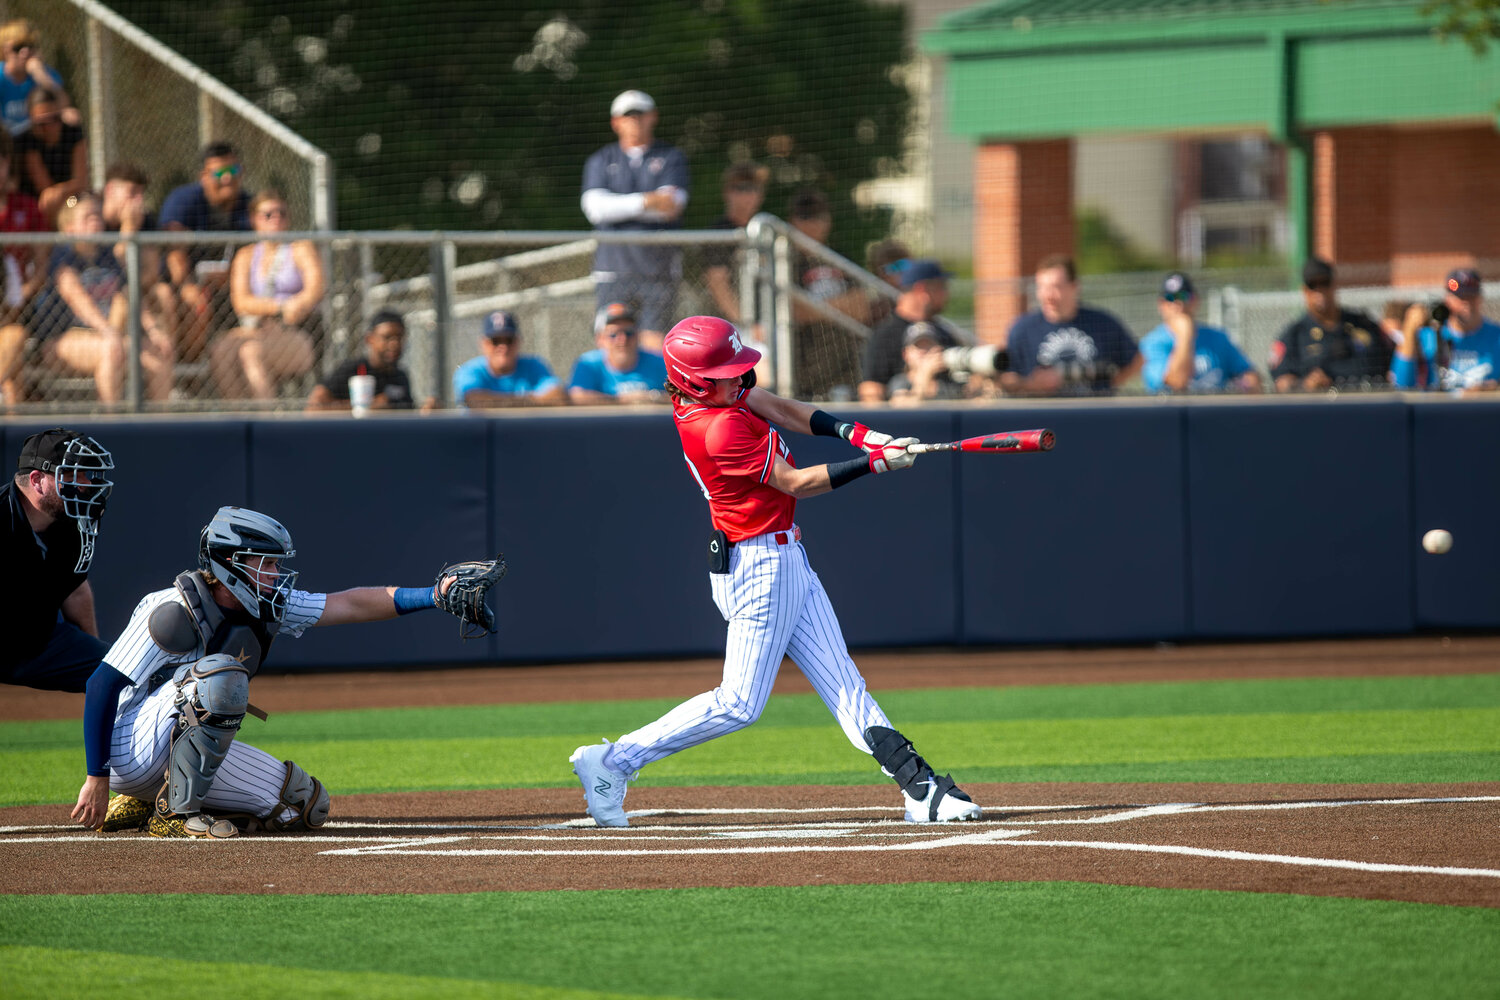 A Katy player hits during Saturday's Regional Quarterfinal between Katy and Tompkins at Cy-Springs.